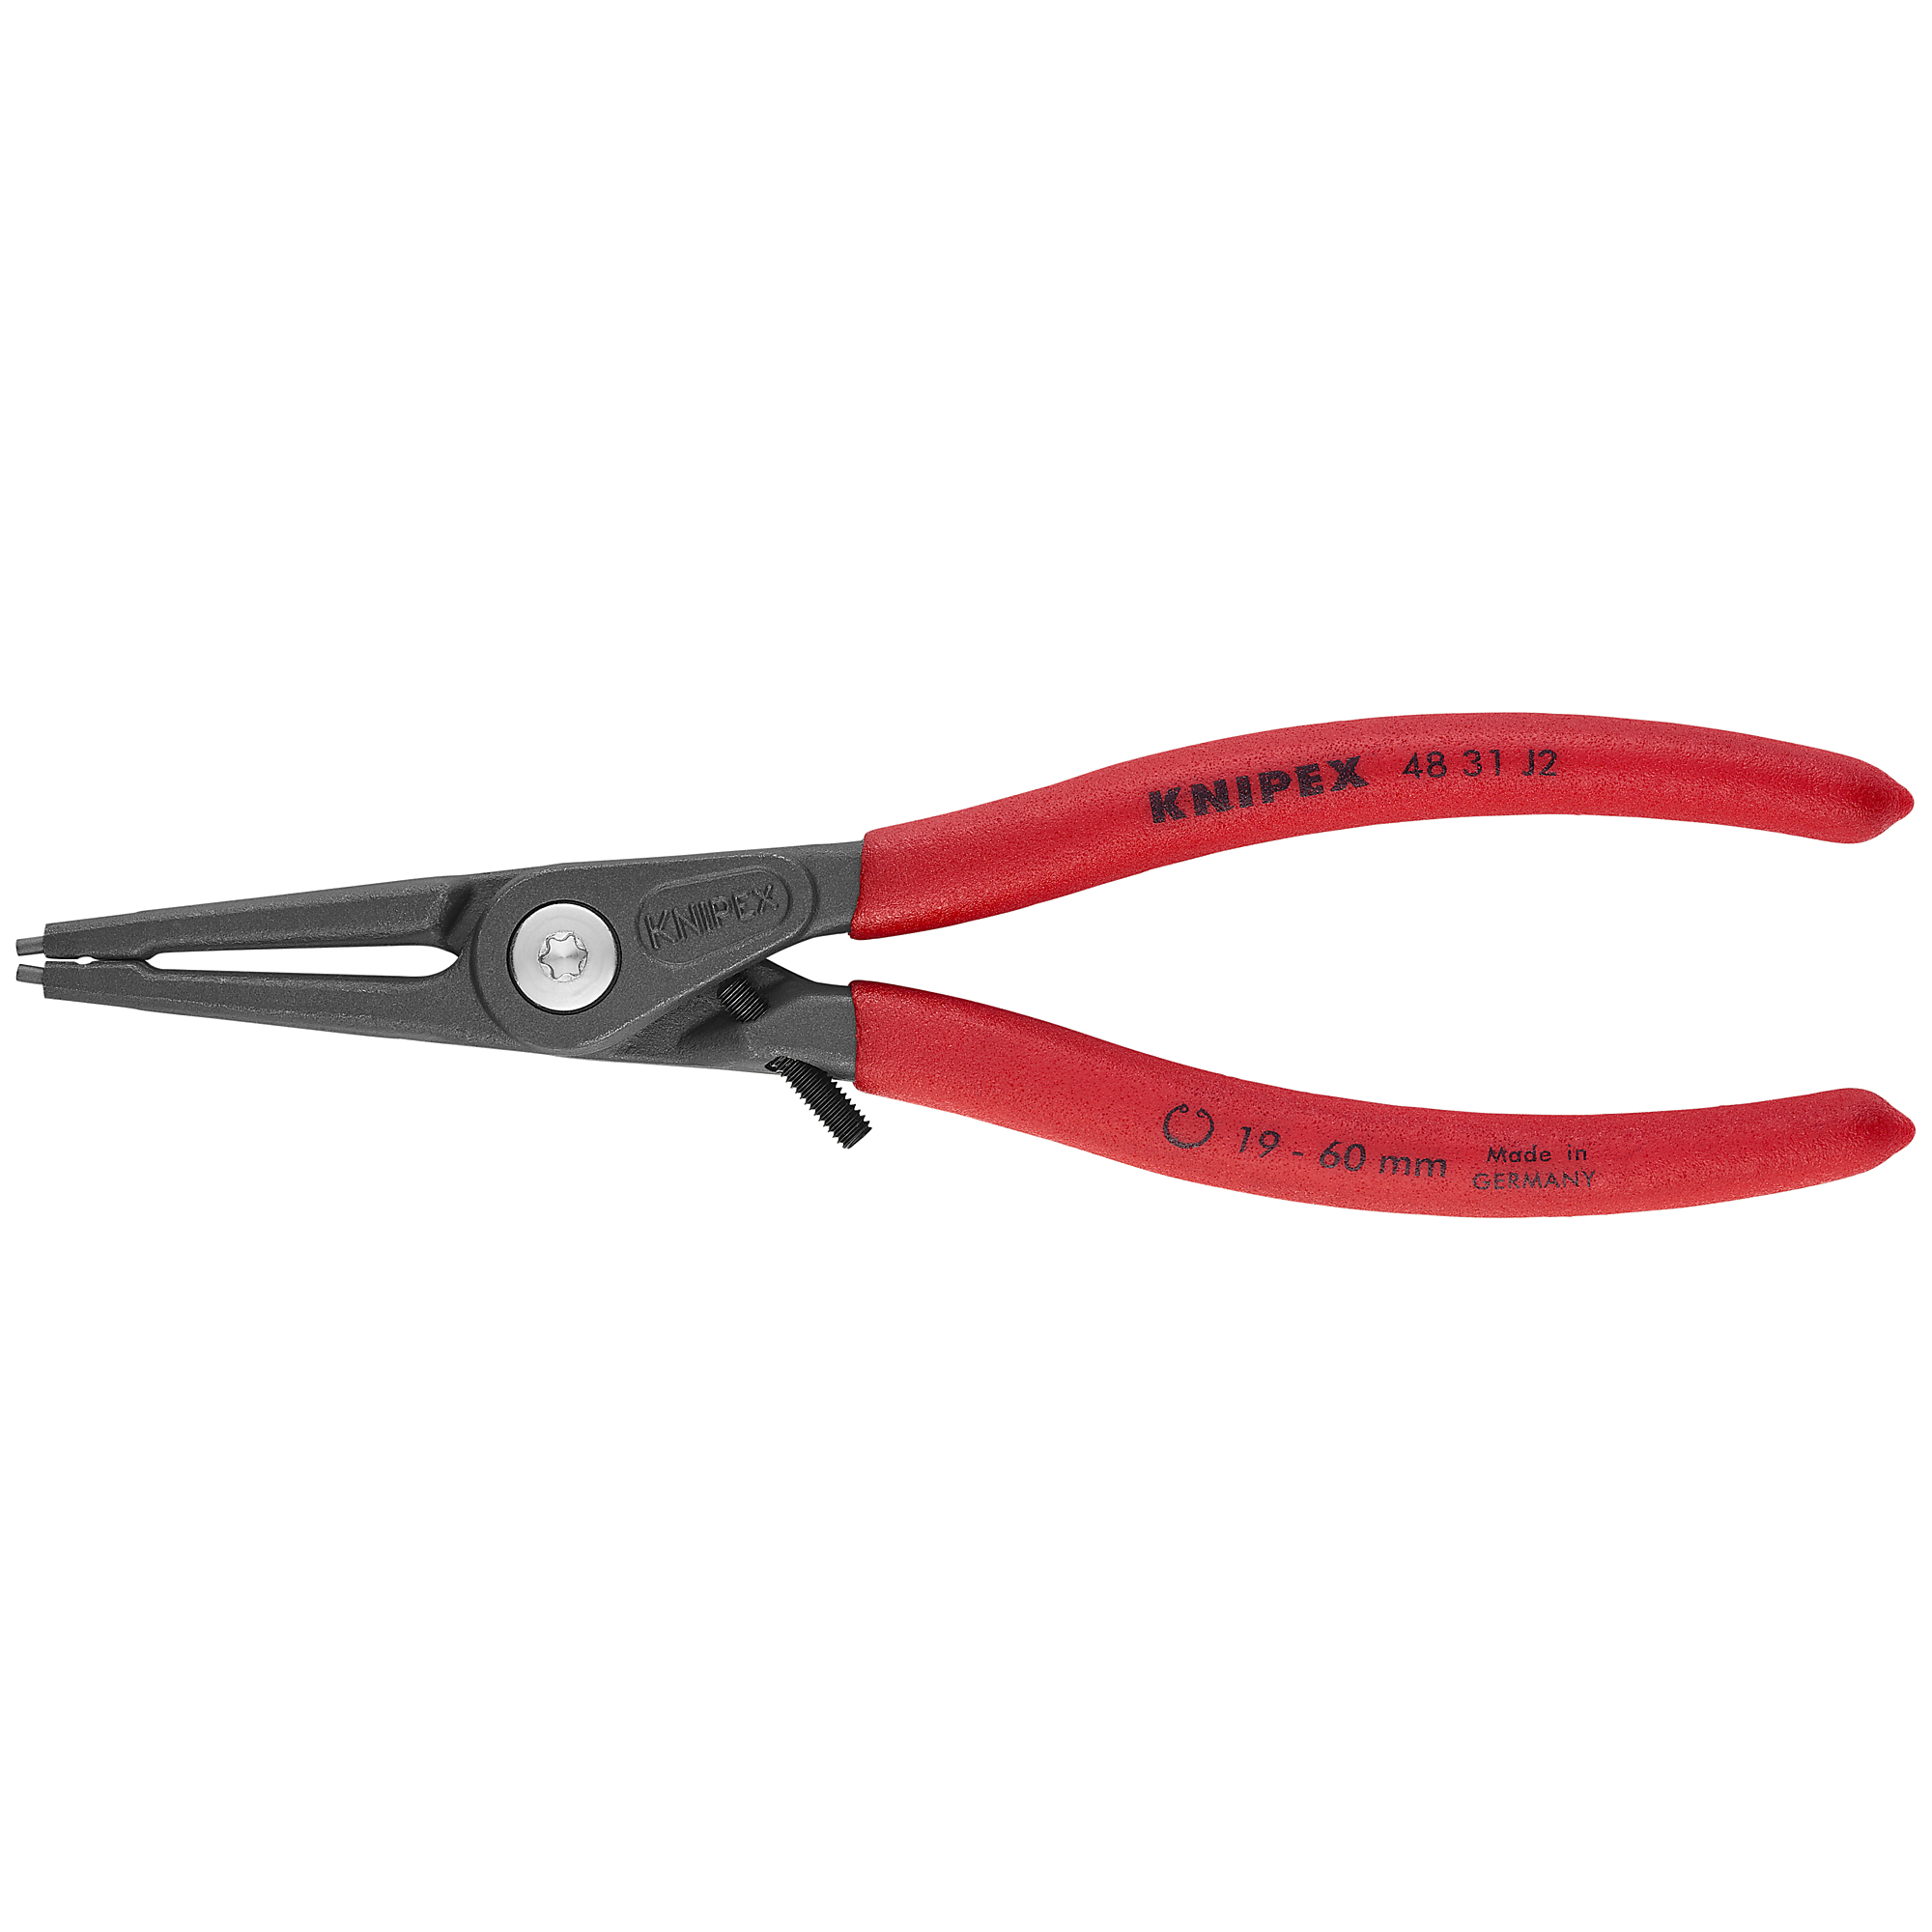 KNIPEX, Int Prec. Snap Ring Pliers-Limiter,5/64 tip,7.25Inch, Pieces (qty.) 1 Material Steel, Model 48 31 J2